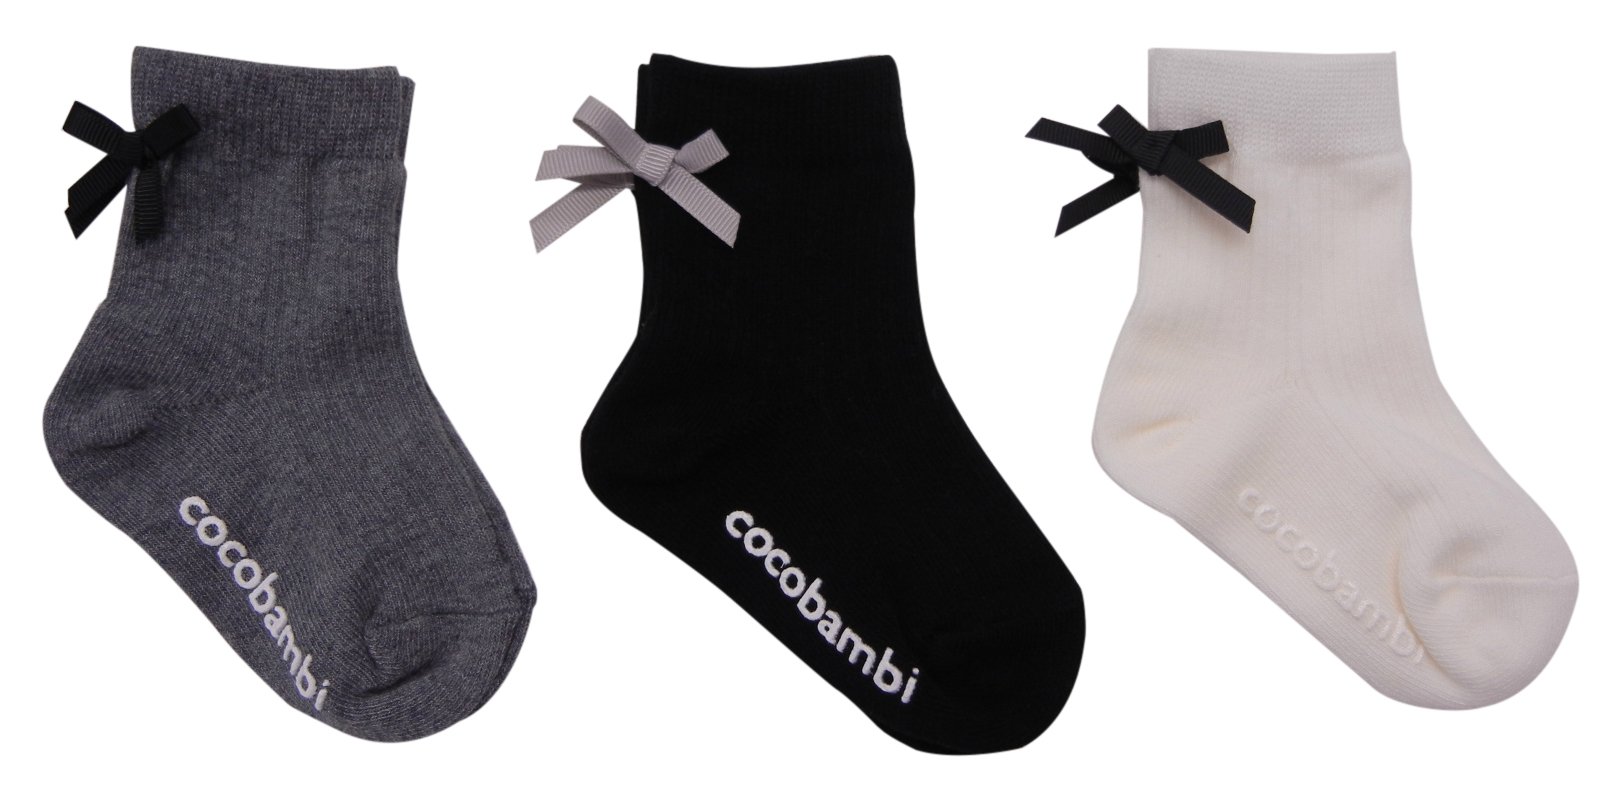 cocobambi 3 pair collection child socks Crew height ribbon attaching 15cm - 20cmsbeli cease attaching GY